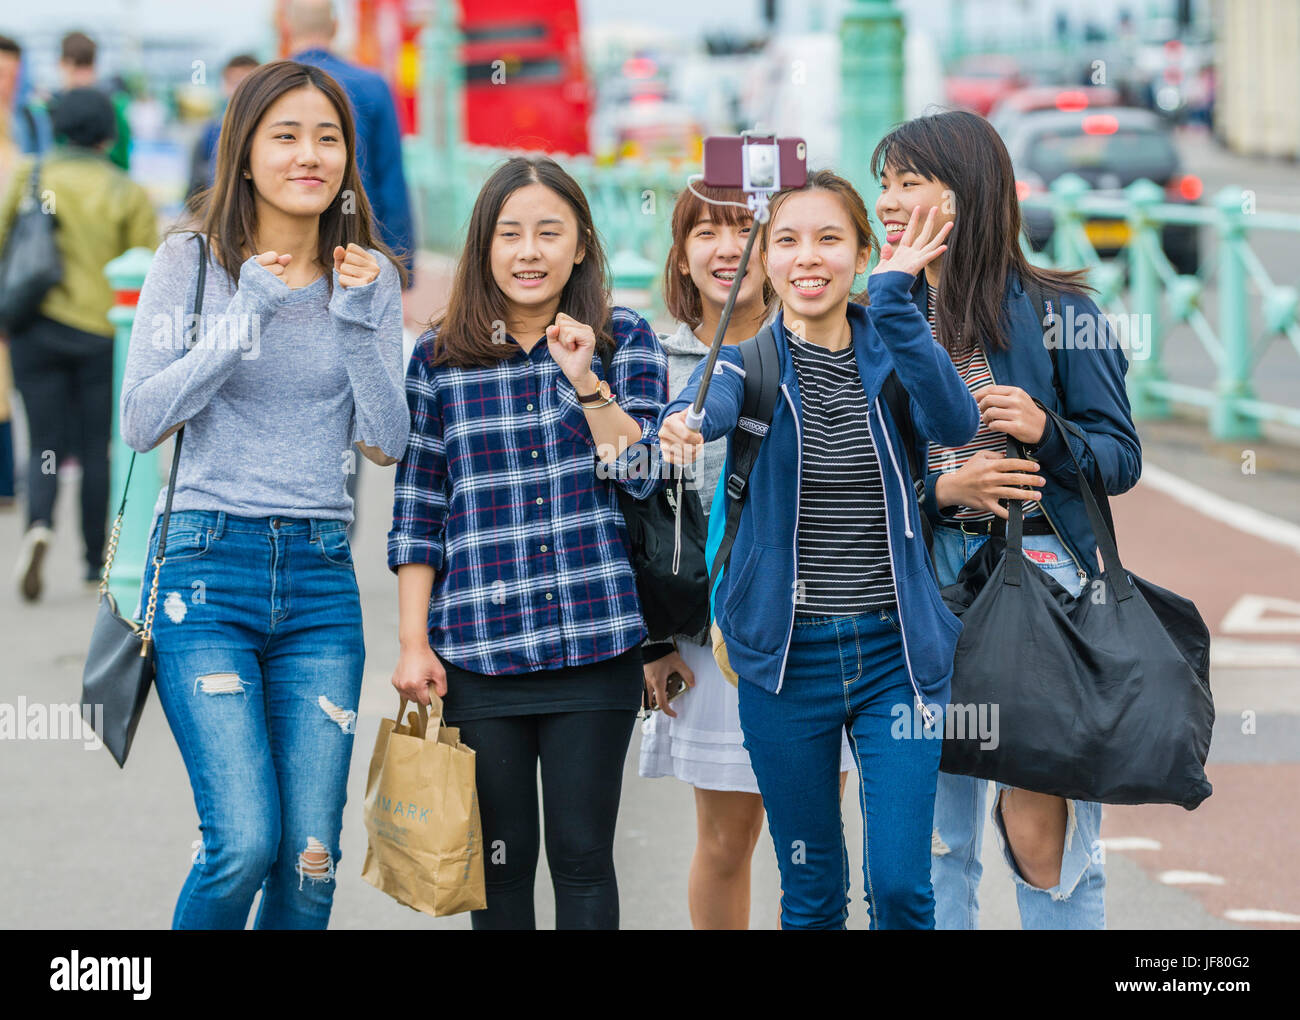 Taking a selfie. Group of Asian friends taking a group selfie using a smartphone on a selfie stick. Stock Photo